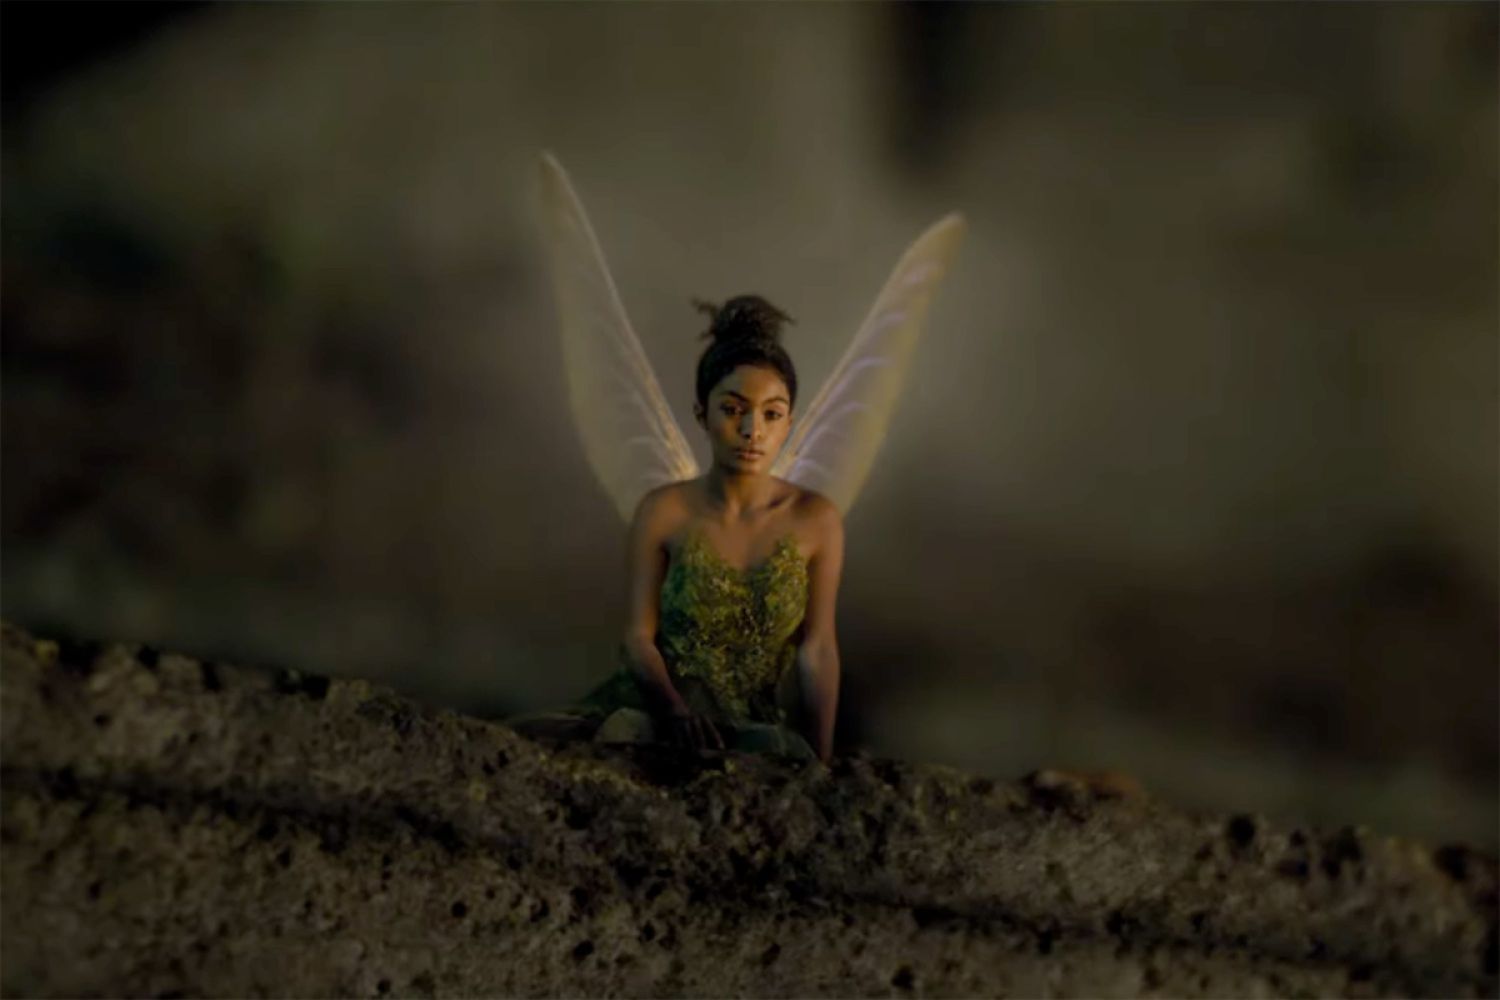 Yara Shahidi as Tinkerbell in the first trailer for Disney's Peter Pan & Wendy